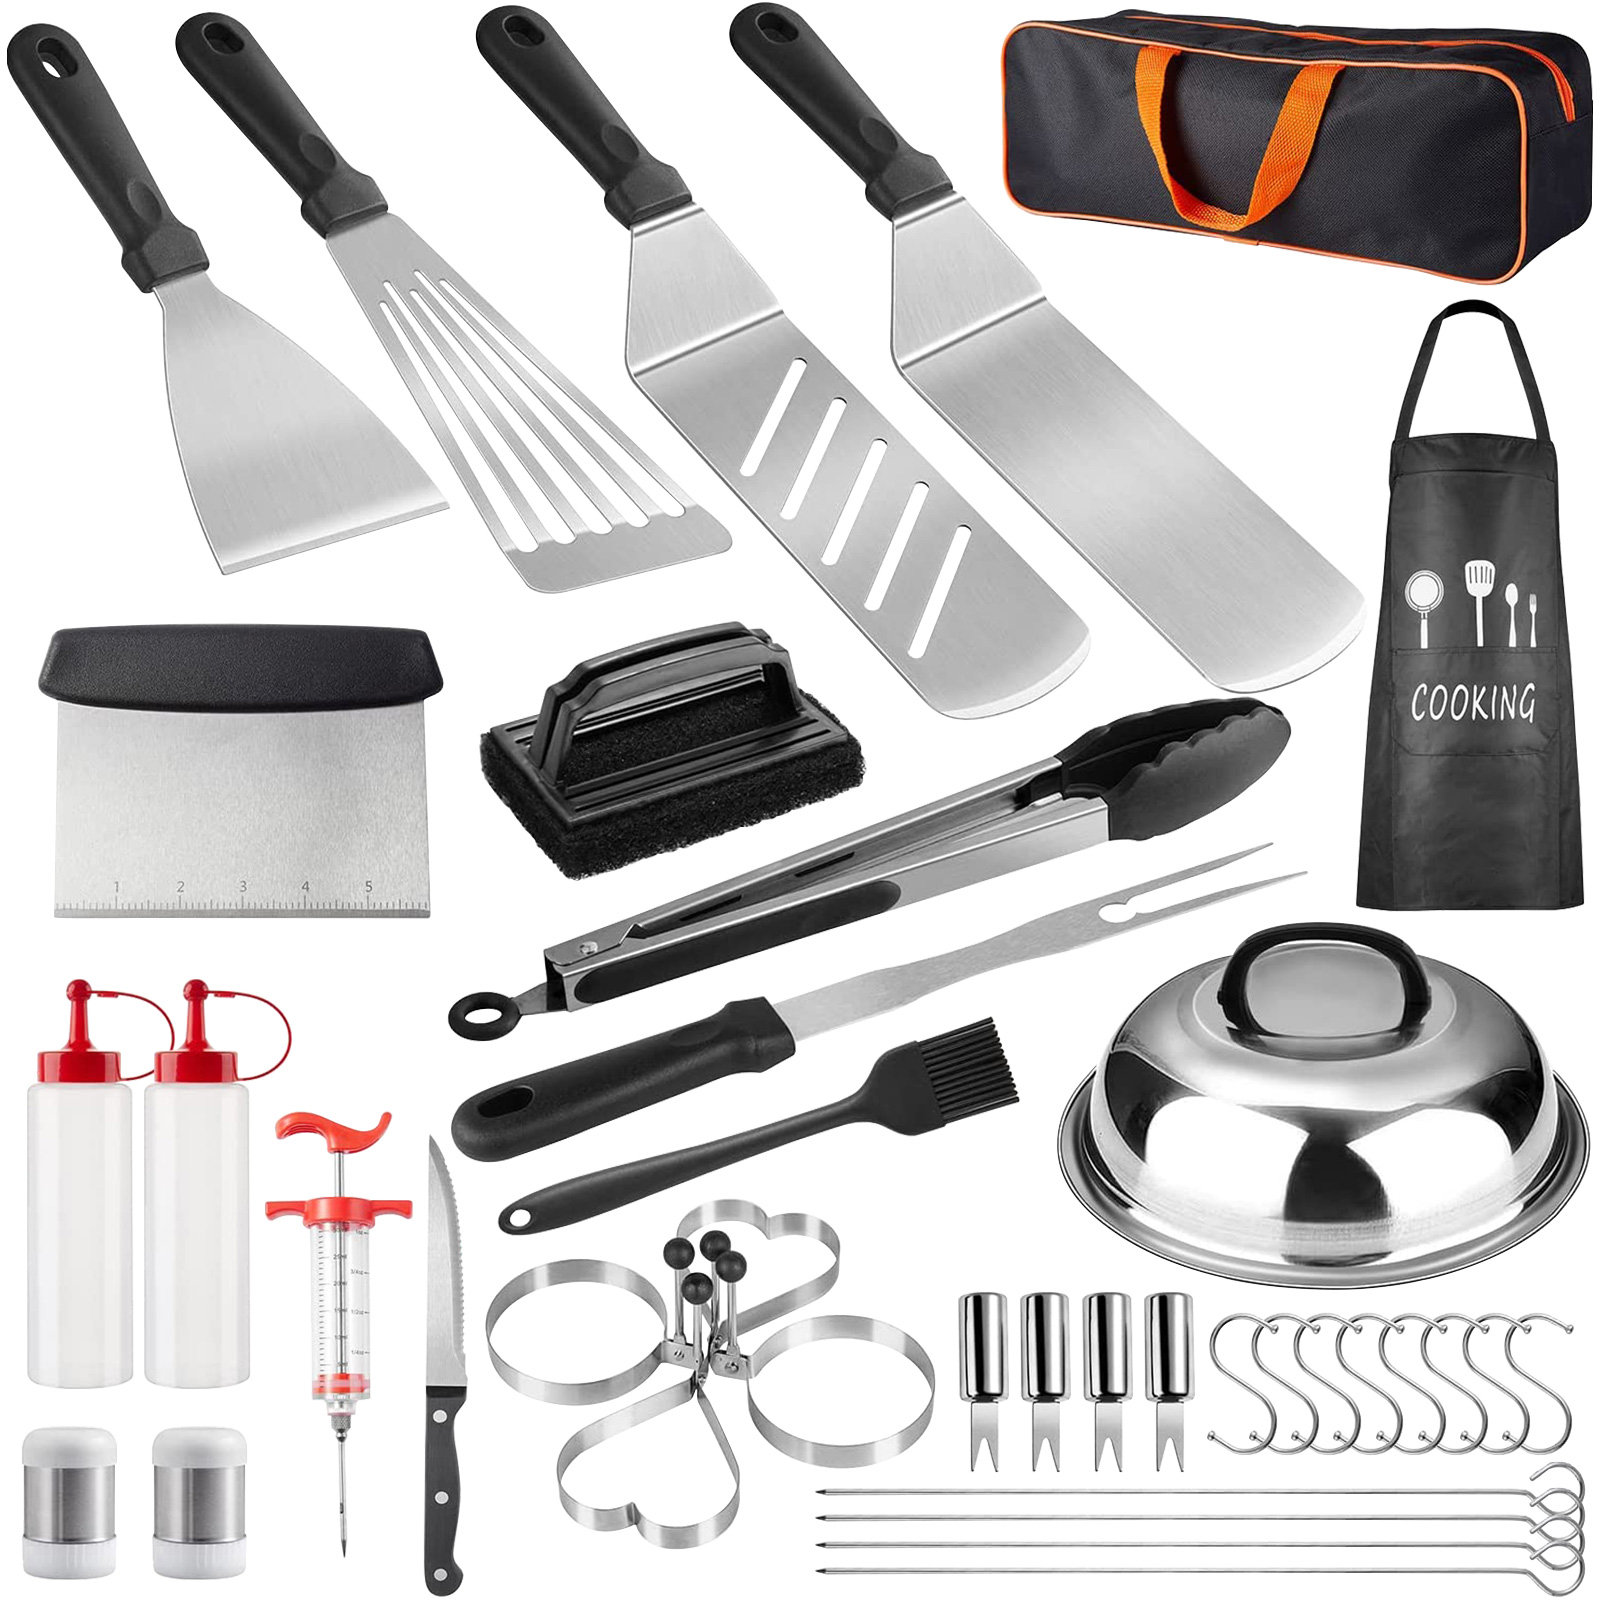 Teppanyaki Griddle Tools and Accessories